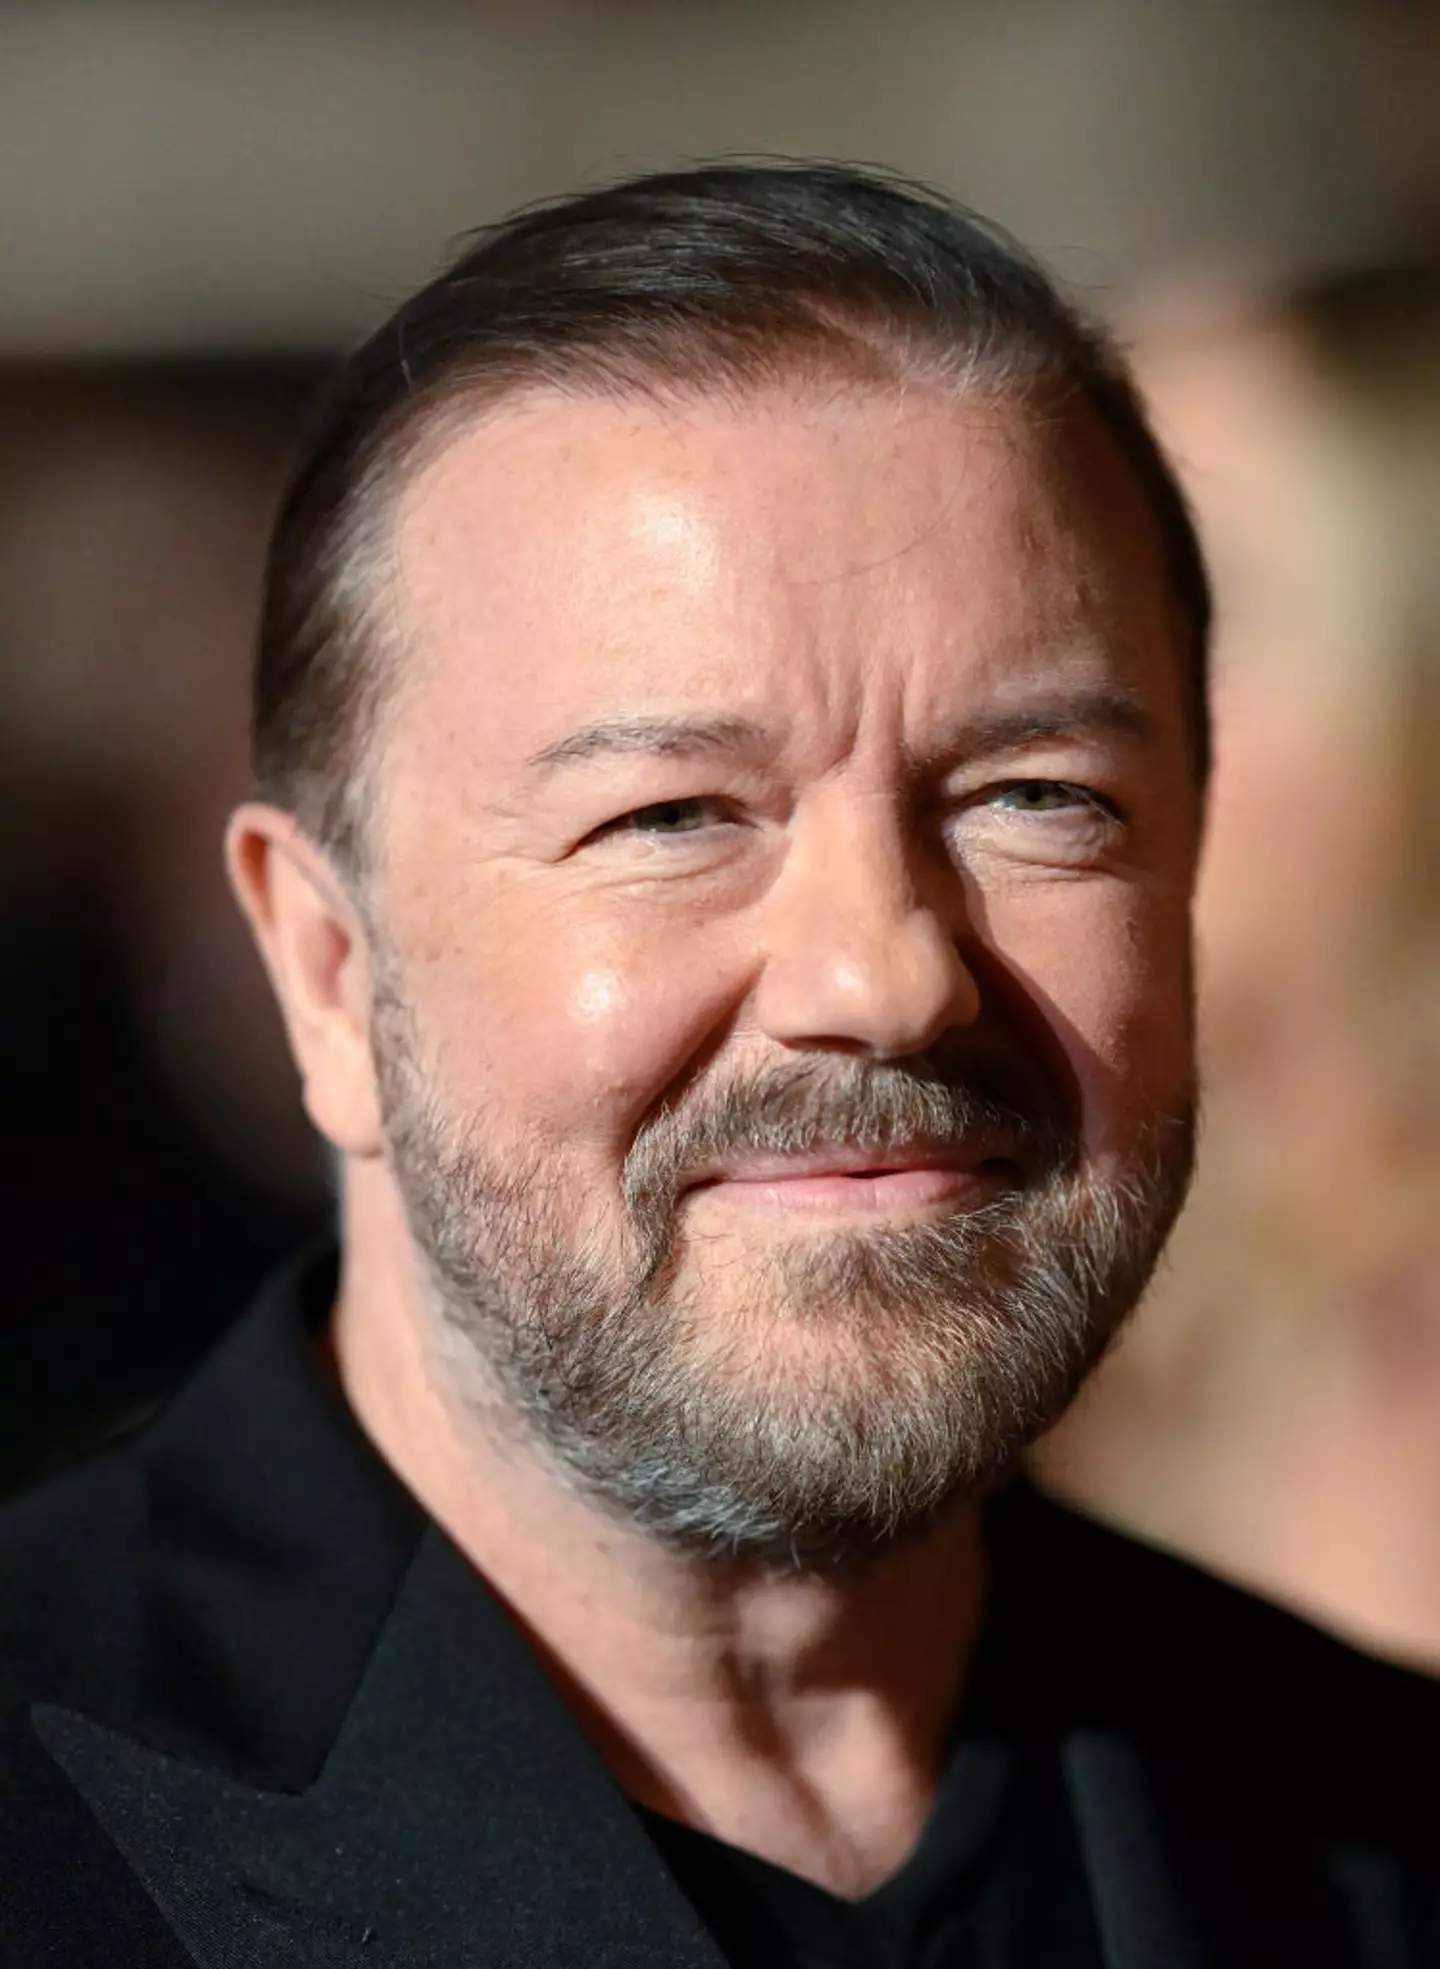 Ricky Gervais has been ridiculed by fans for referring to himself as middle-aged.